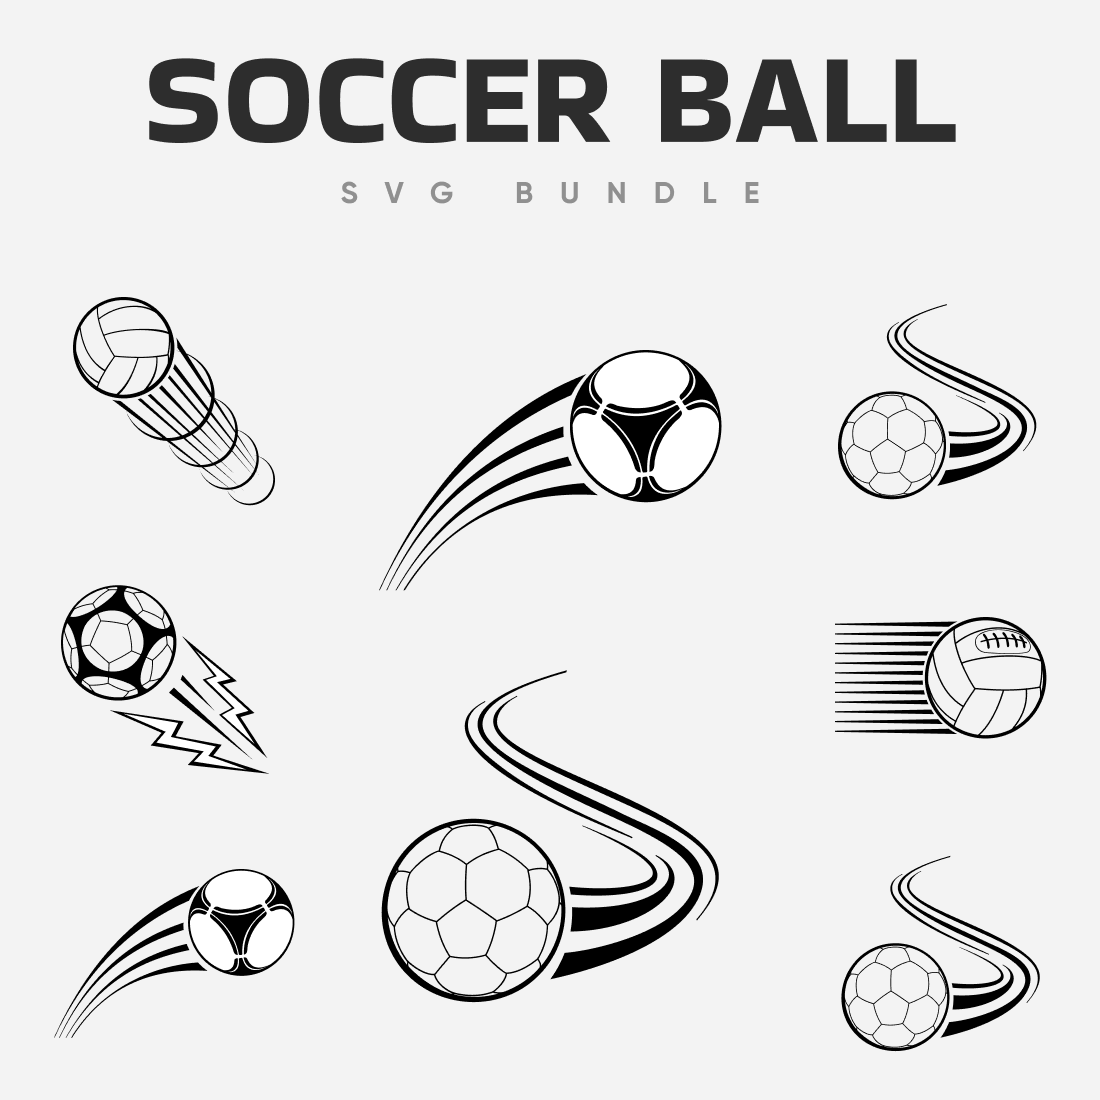 A soccer ball flying in a certain direction.